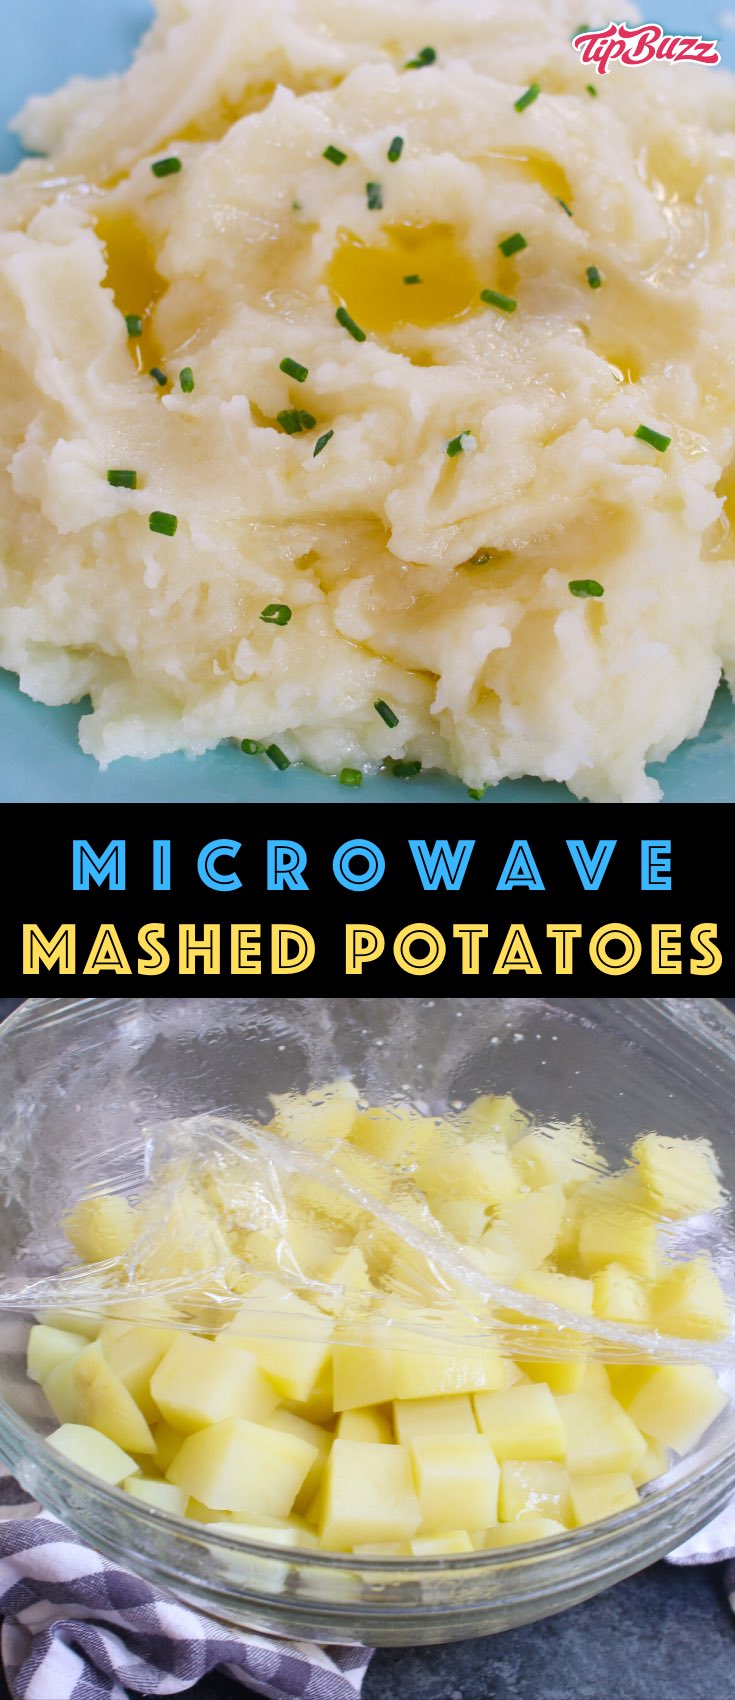 Microwave mashed potatoes are ready in 15 minutes, fluffy, creamy and delicious! See how easy it is to make and forget about other methods!